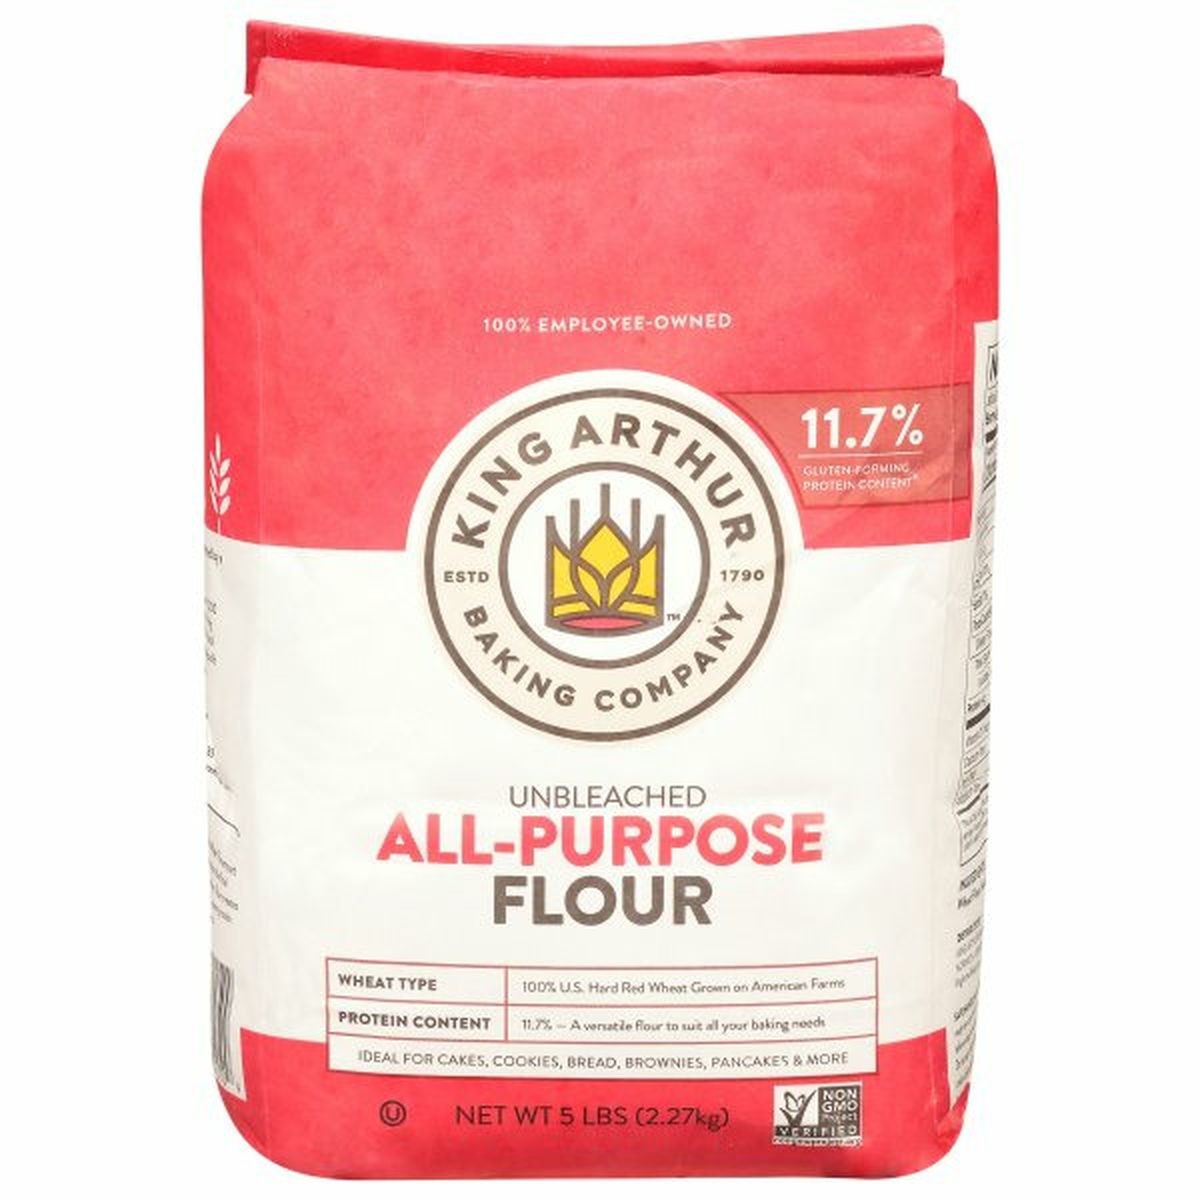 Calories in King Arthur Baking Company All-Purpose Flour, Unbleached